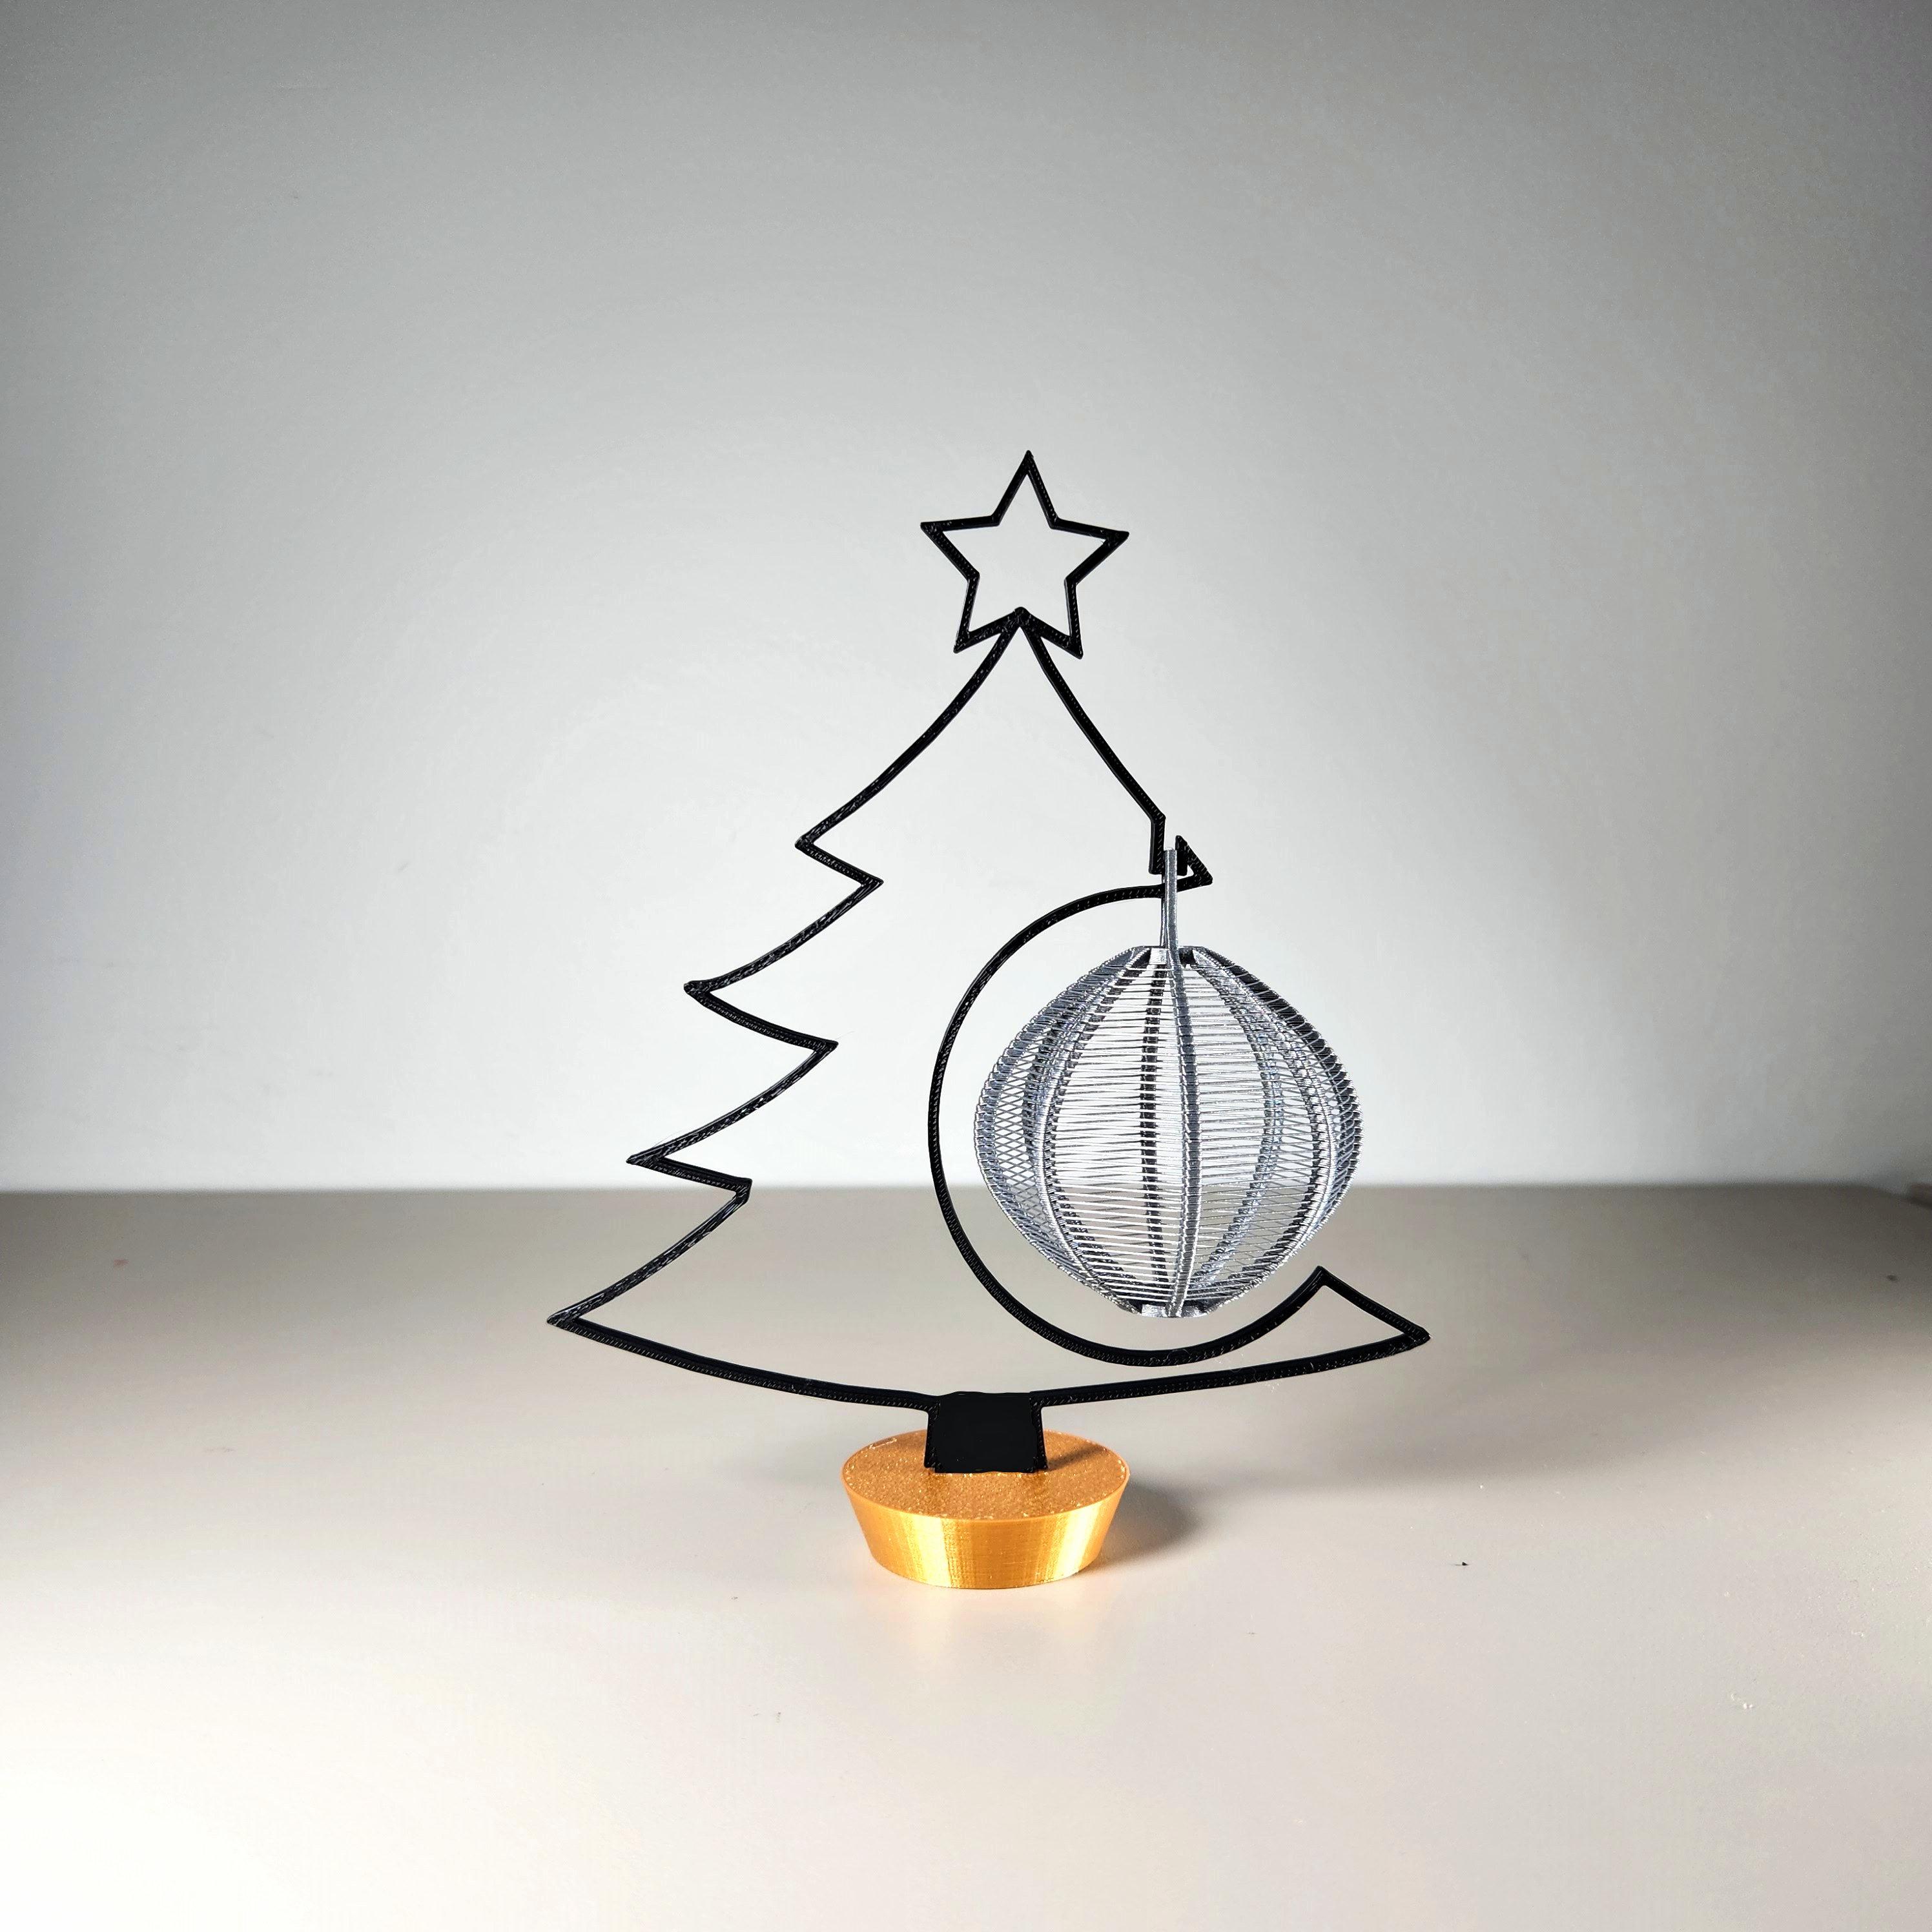 Minimalist Christmas Tree Bauble Display Stand (2 versions) 3d model